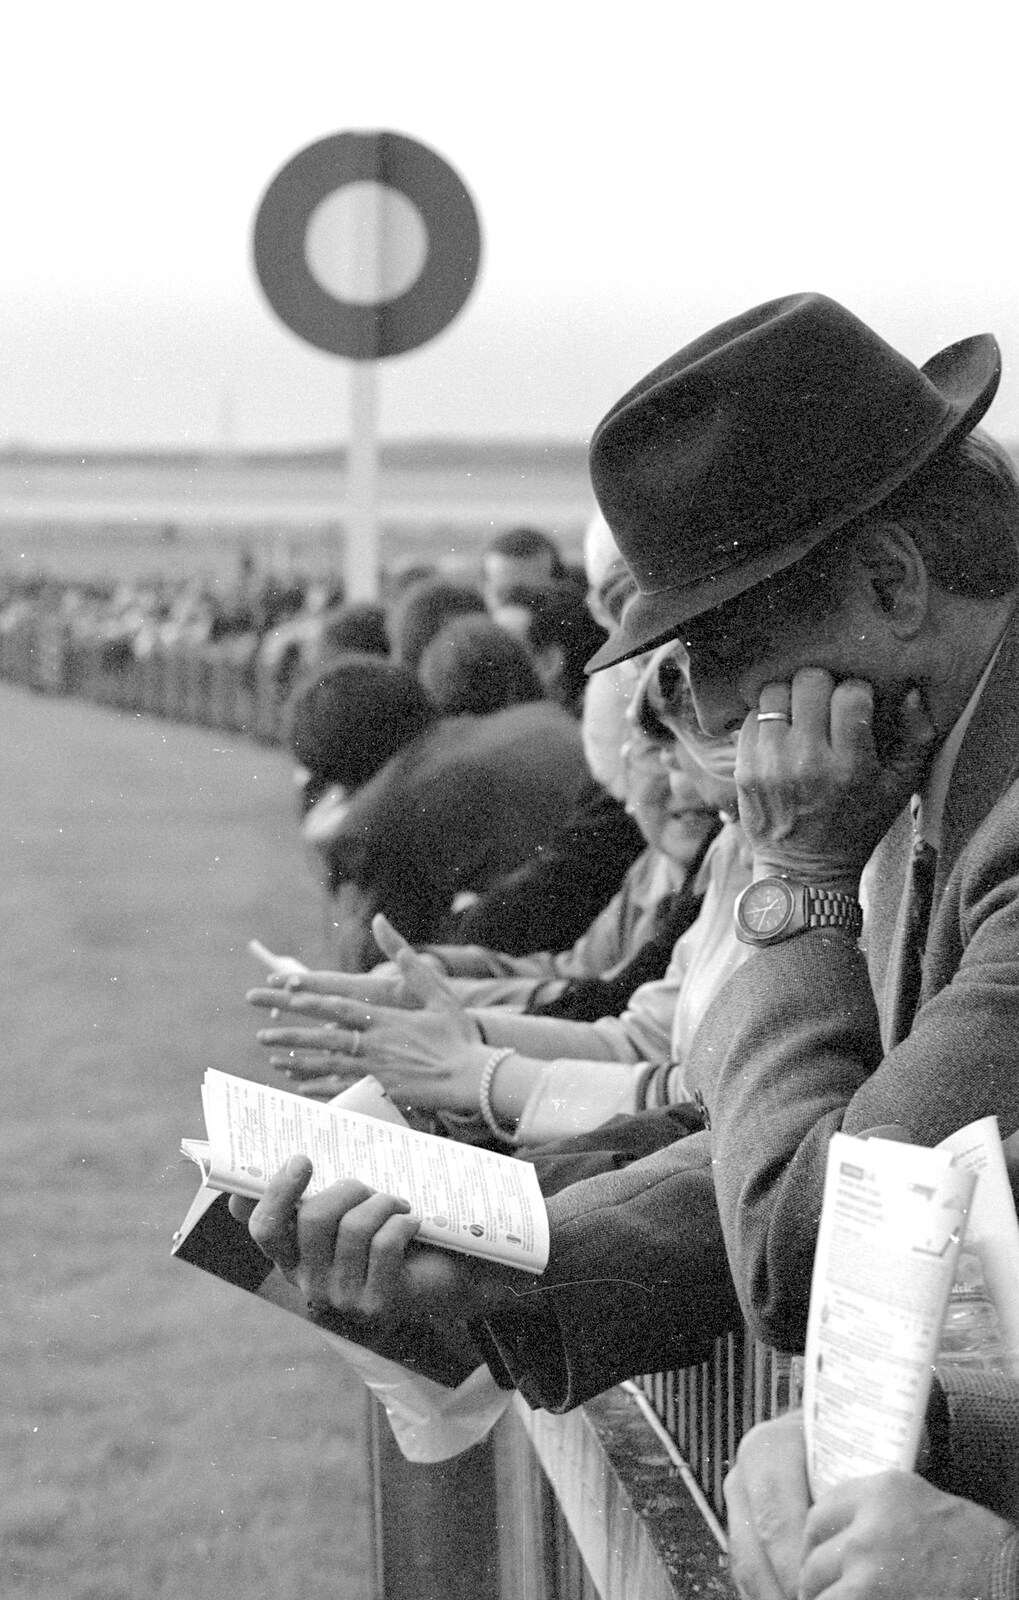 Contemplating the form from 3G Lab Goes to the Races, Newmarket, Suffolk - 15th July 2001